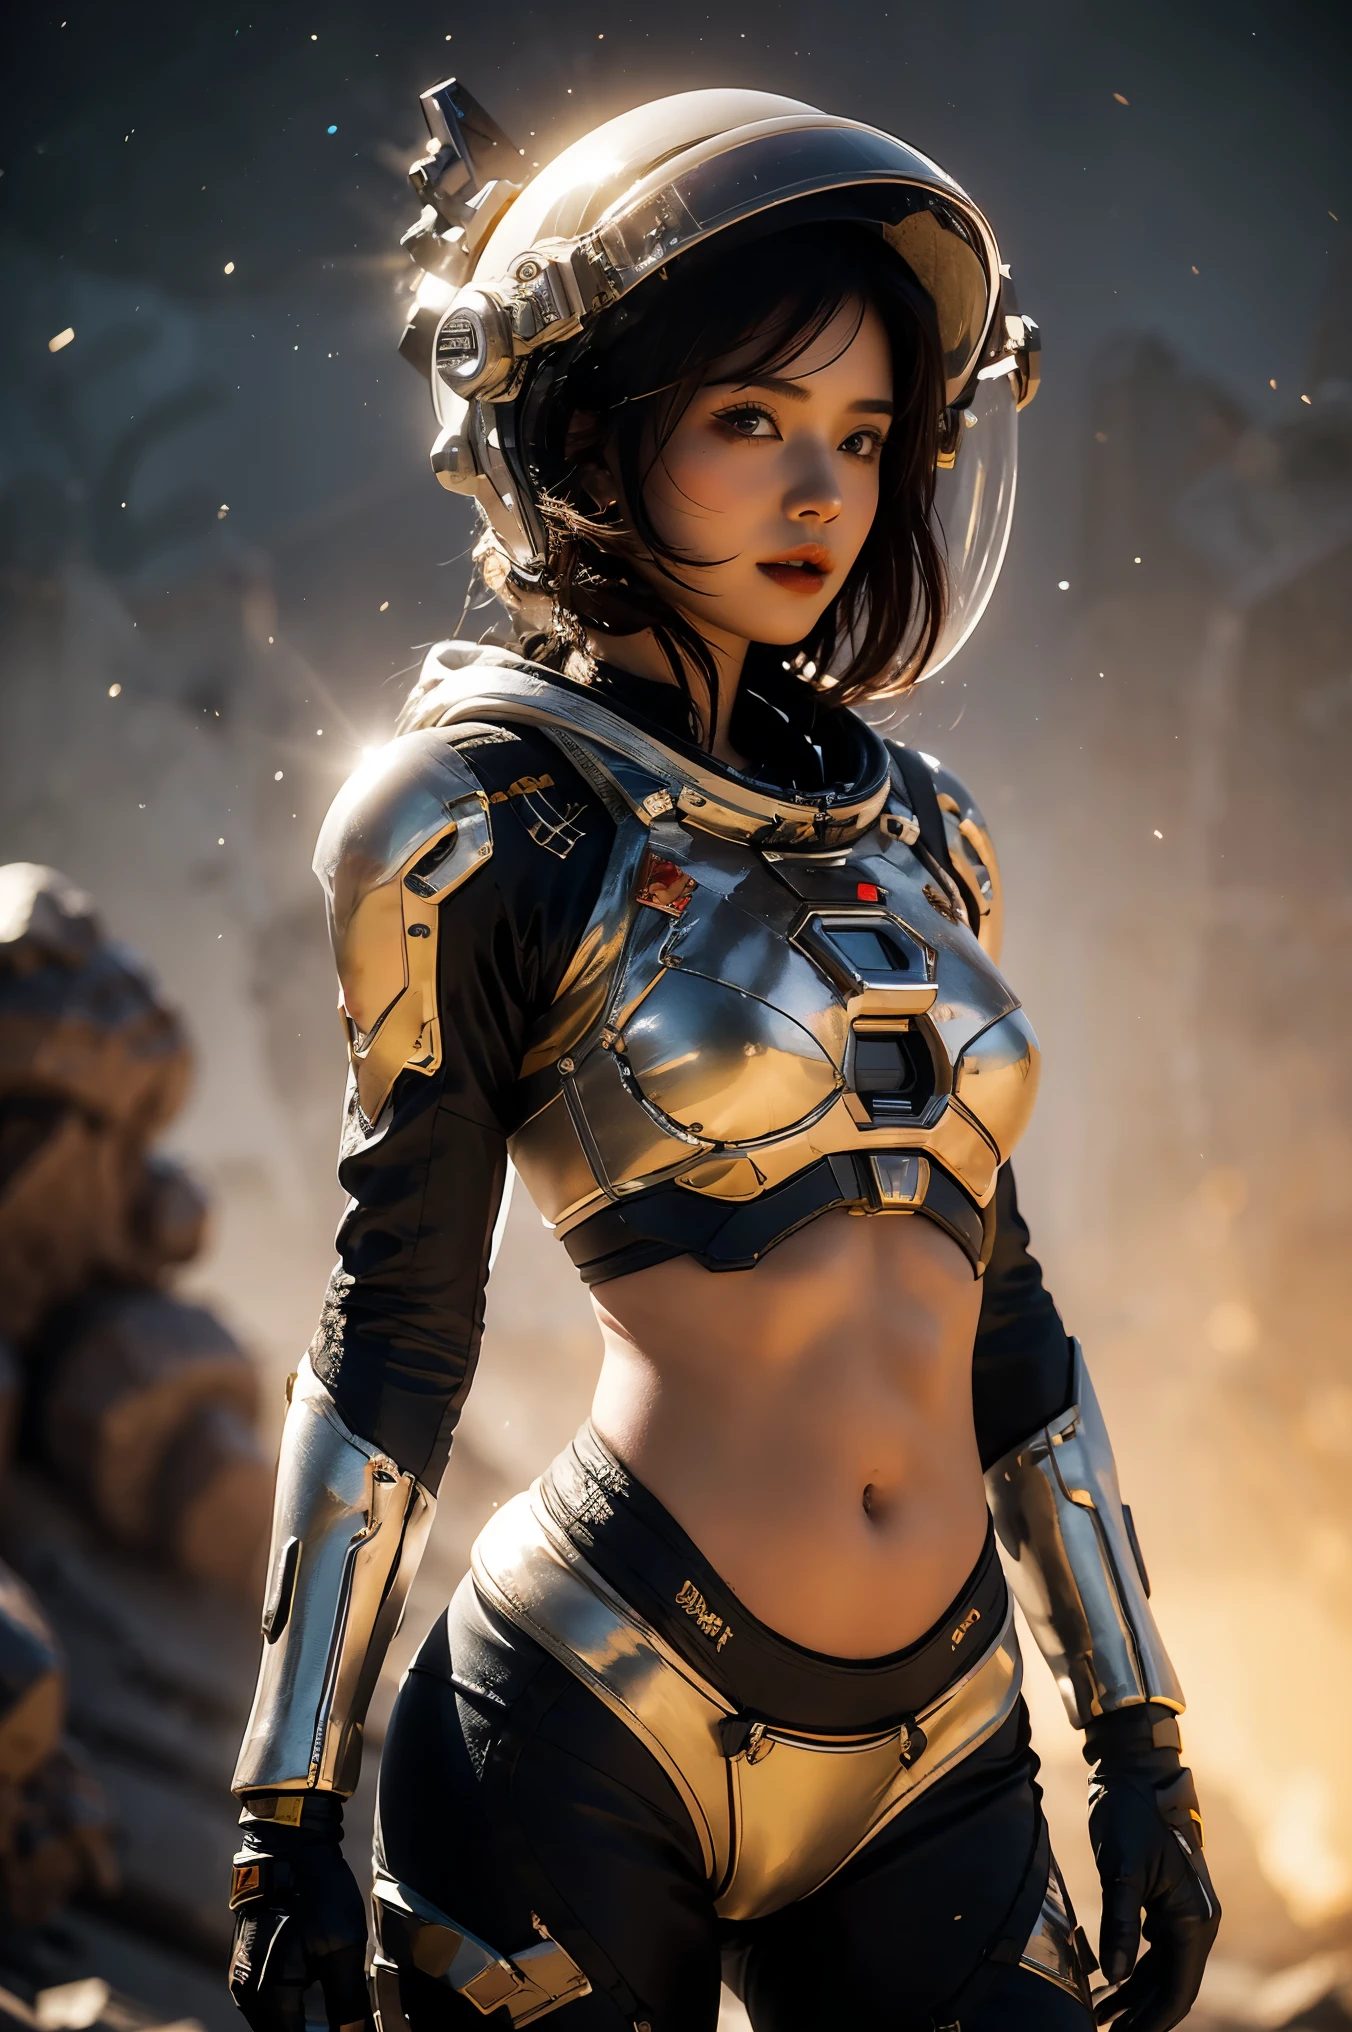 a girl in spacesuit, fully exposed midriff, bare waist,cowboy-shot, in outer space, desolate alien planet, transparen space-helmet,Transparent full-face helmet ,((bikini top)),((metal Bikini armor)), sexy exposed midriff, full metallic armor, bare midriff and waist, open abdomen, fully exposed abdomen, cowboy-shot, realistic, photorealistic, high quality, 8k, extremely detailed, masterpiece, dynamic pose, dramatic lighting, cinematic, sci-fi, futuristic, vibrant colors